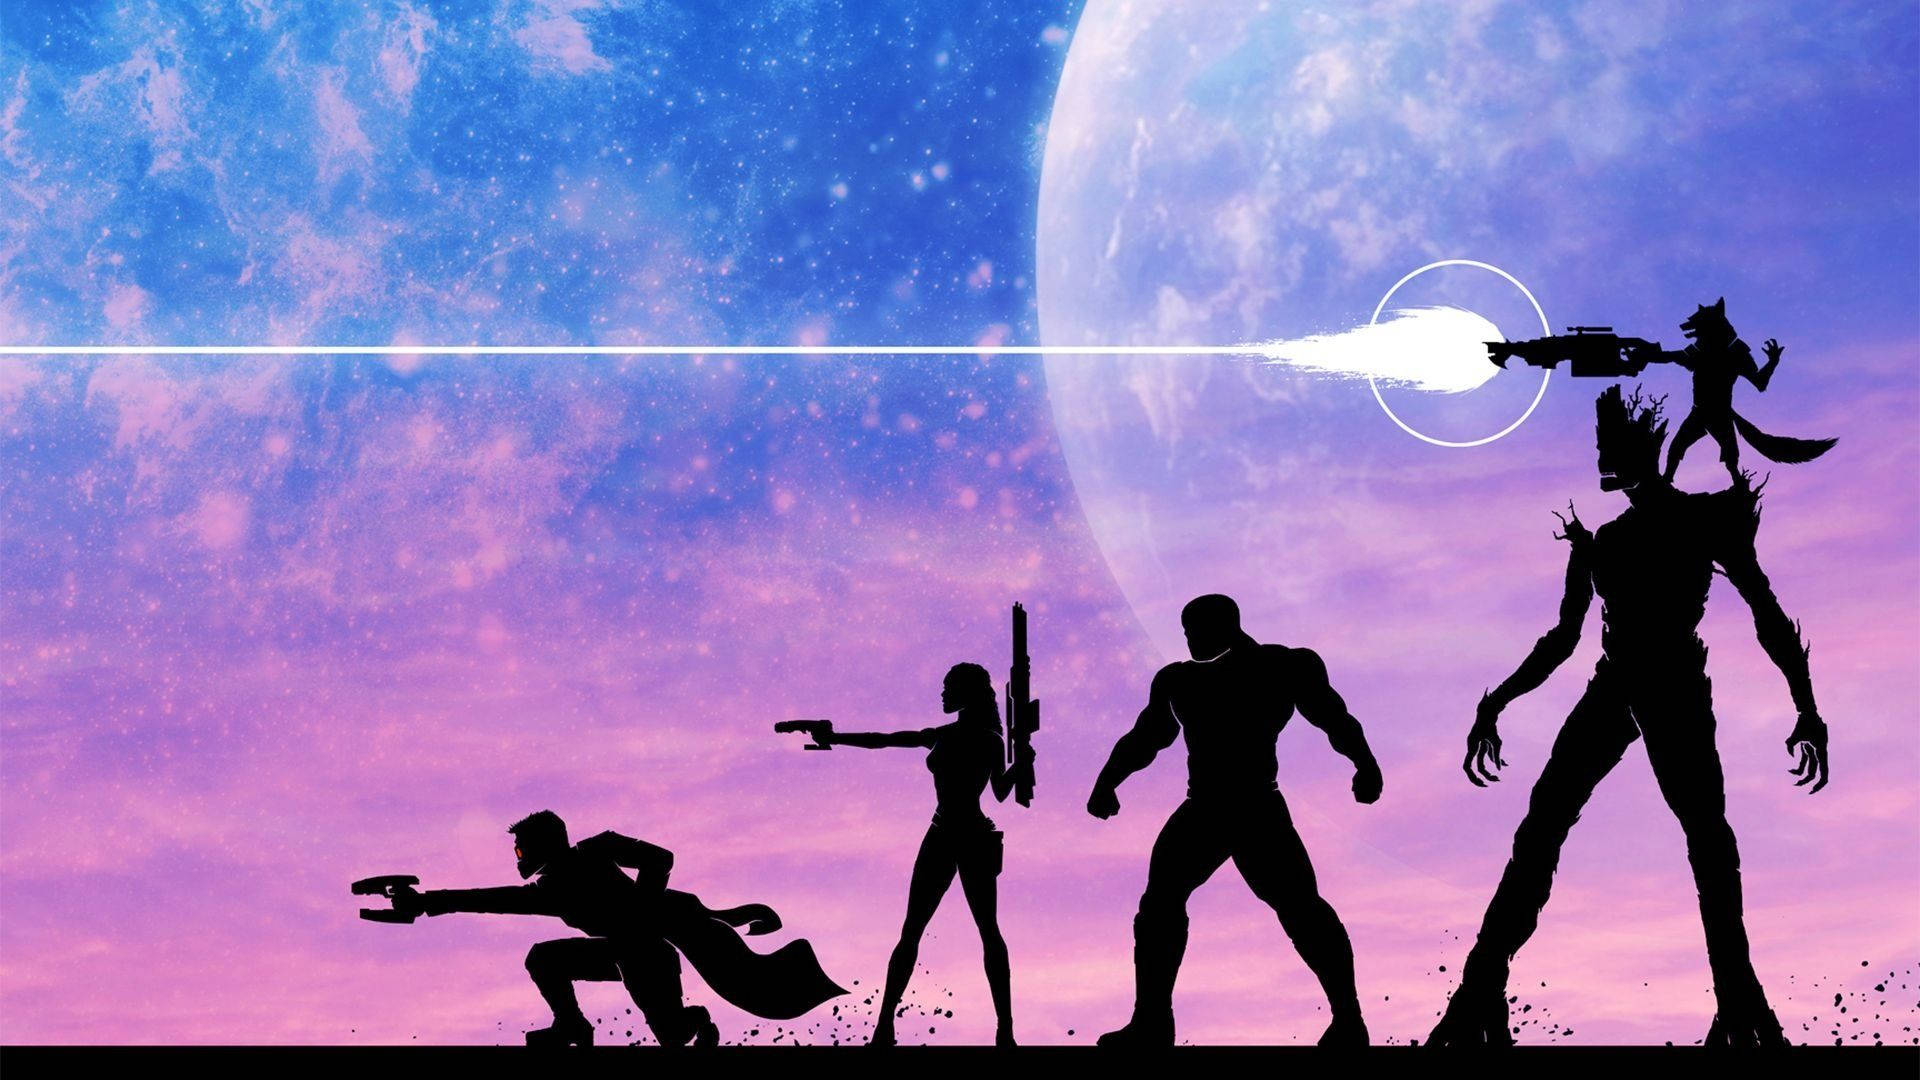 1920X1080 Guardians Of The Galaxy Wallpaper and Background